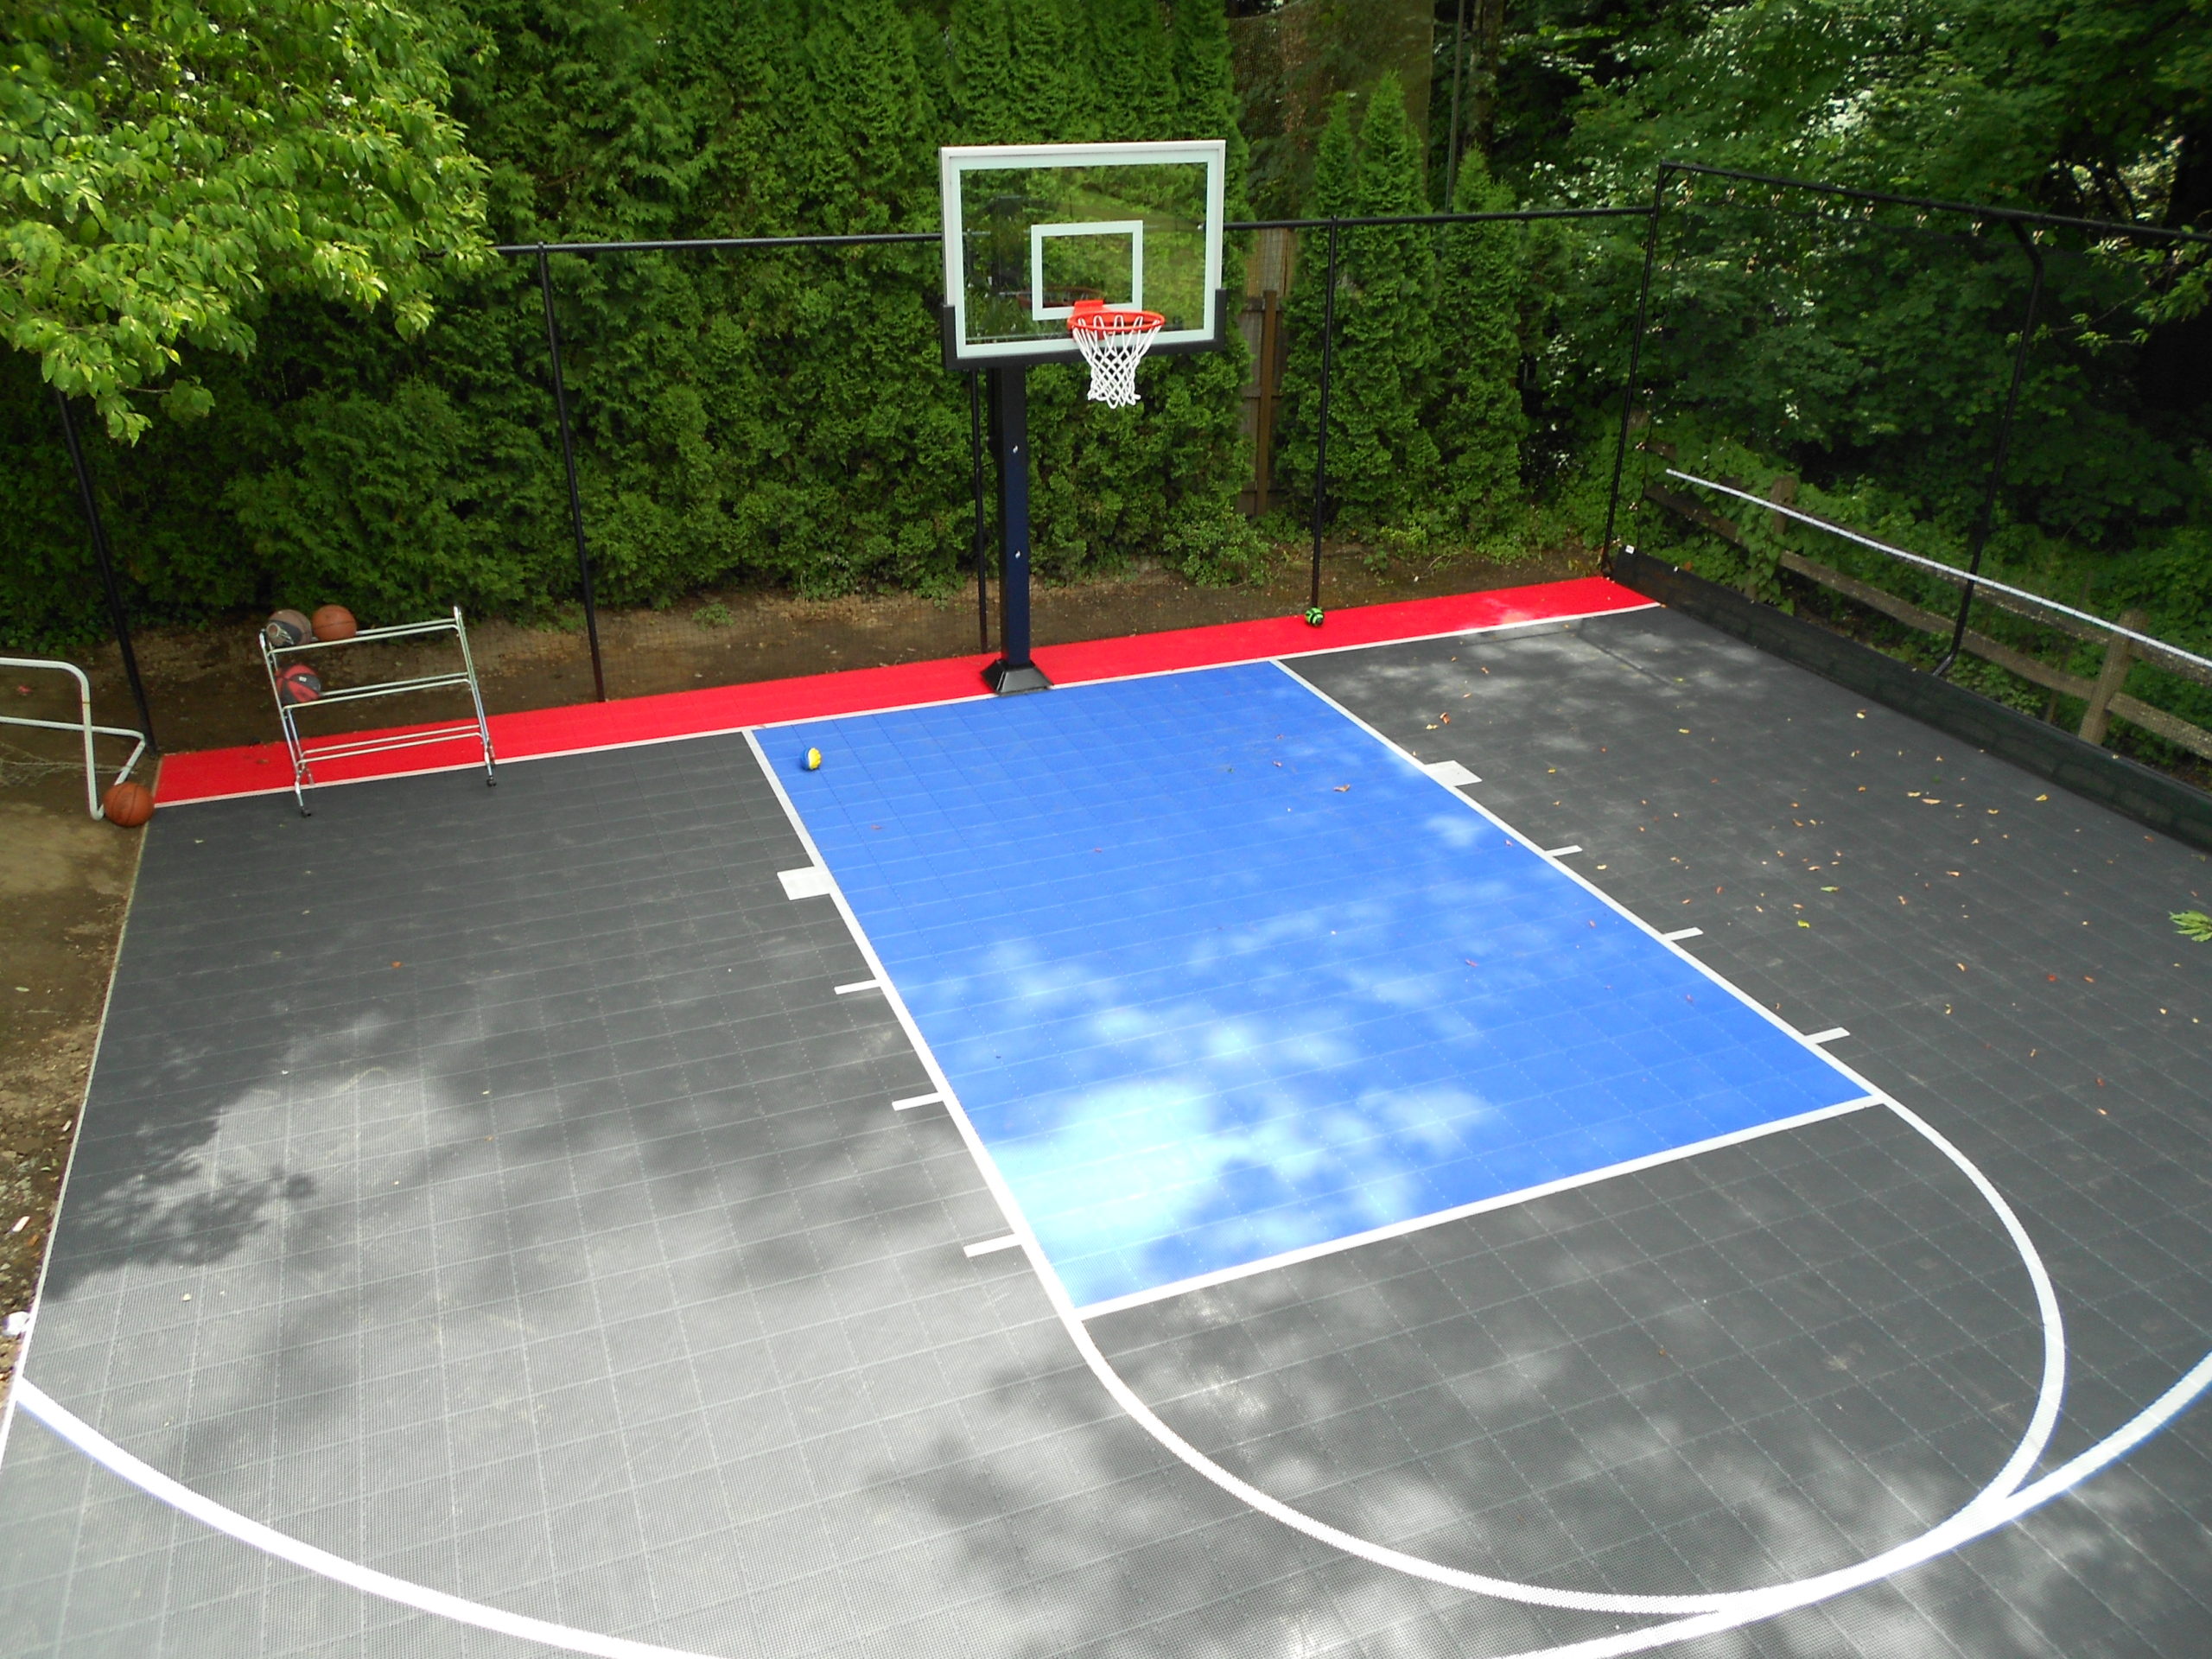 In ground basketball hoops offer a premium experience.